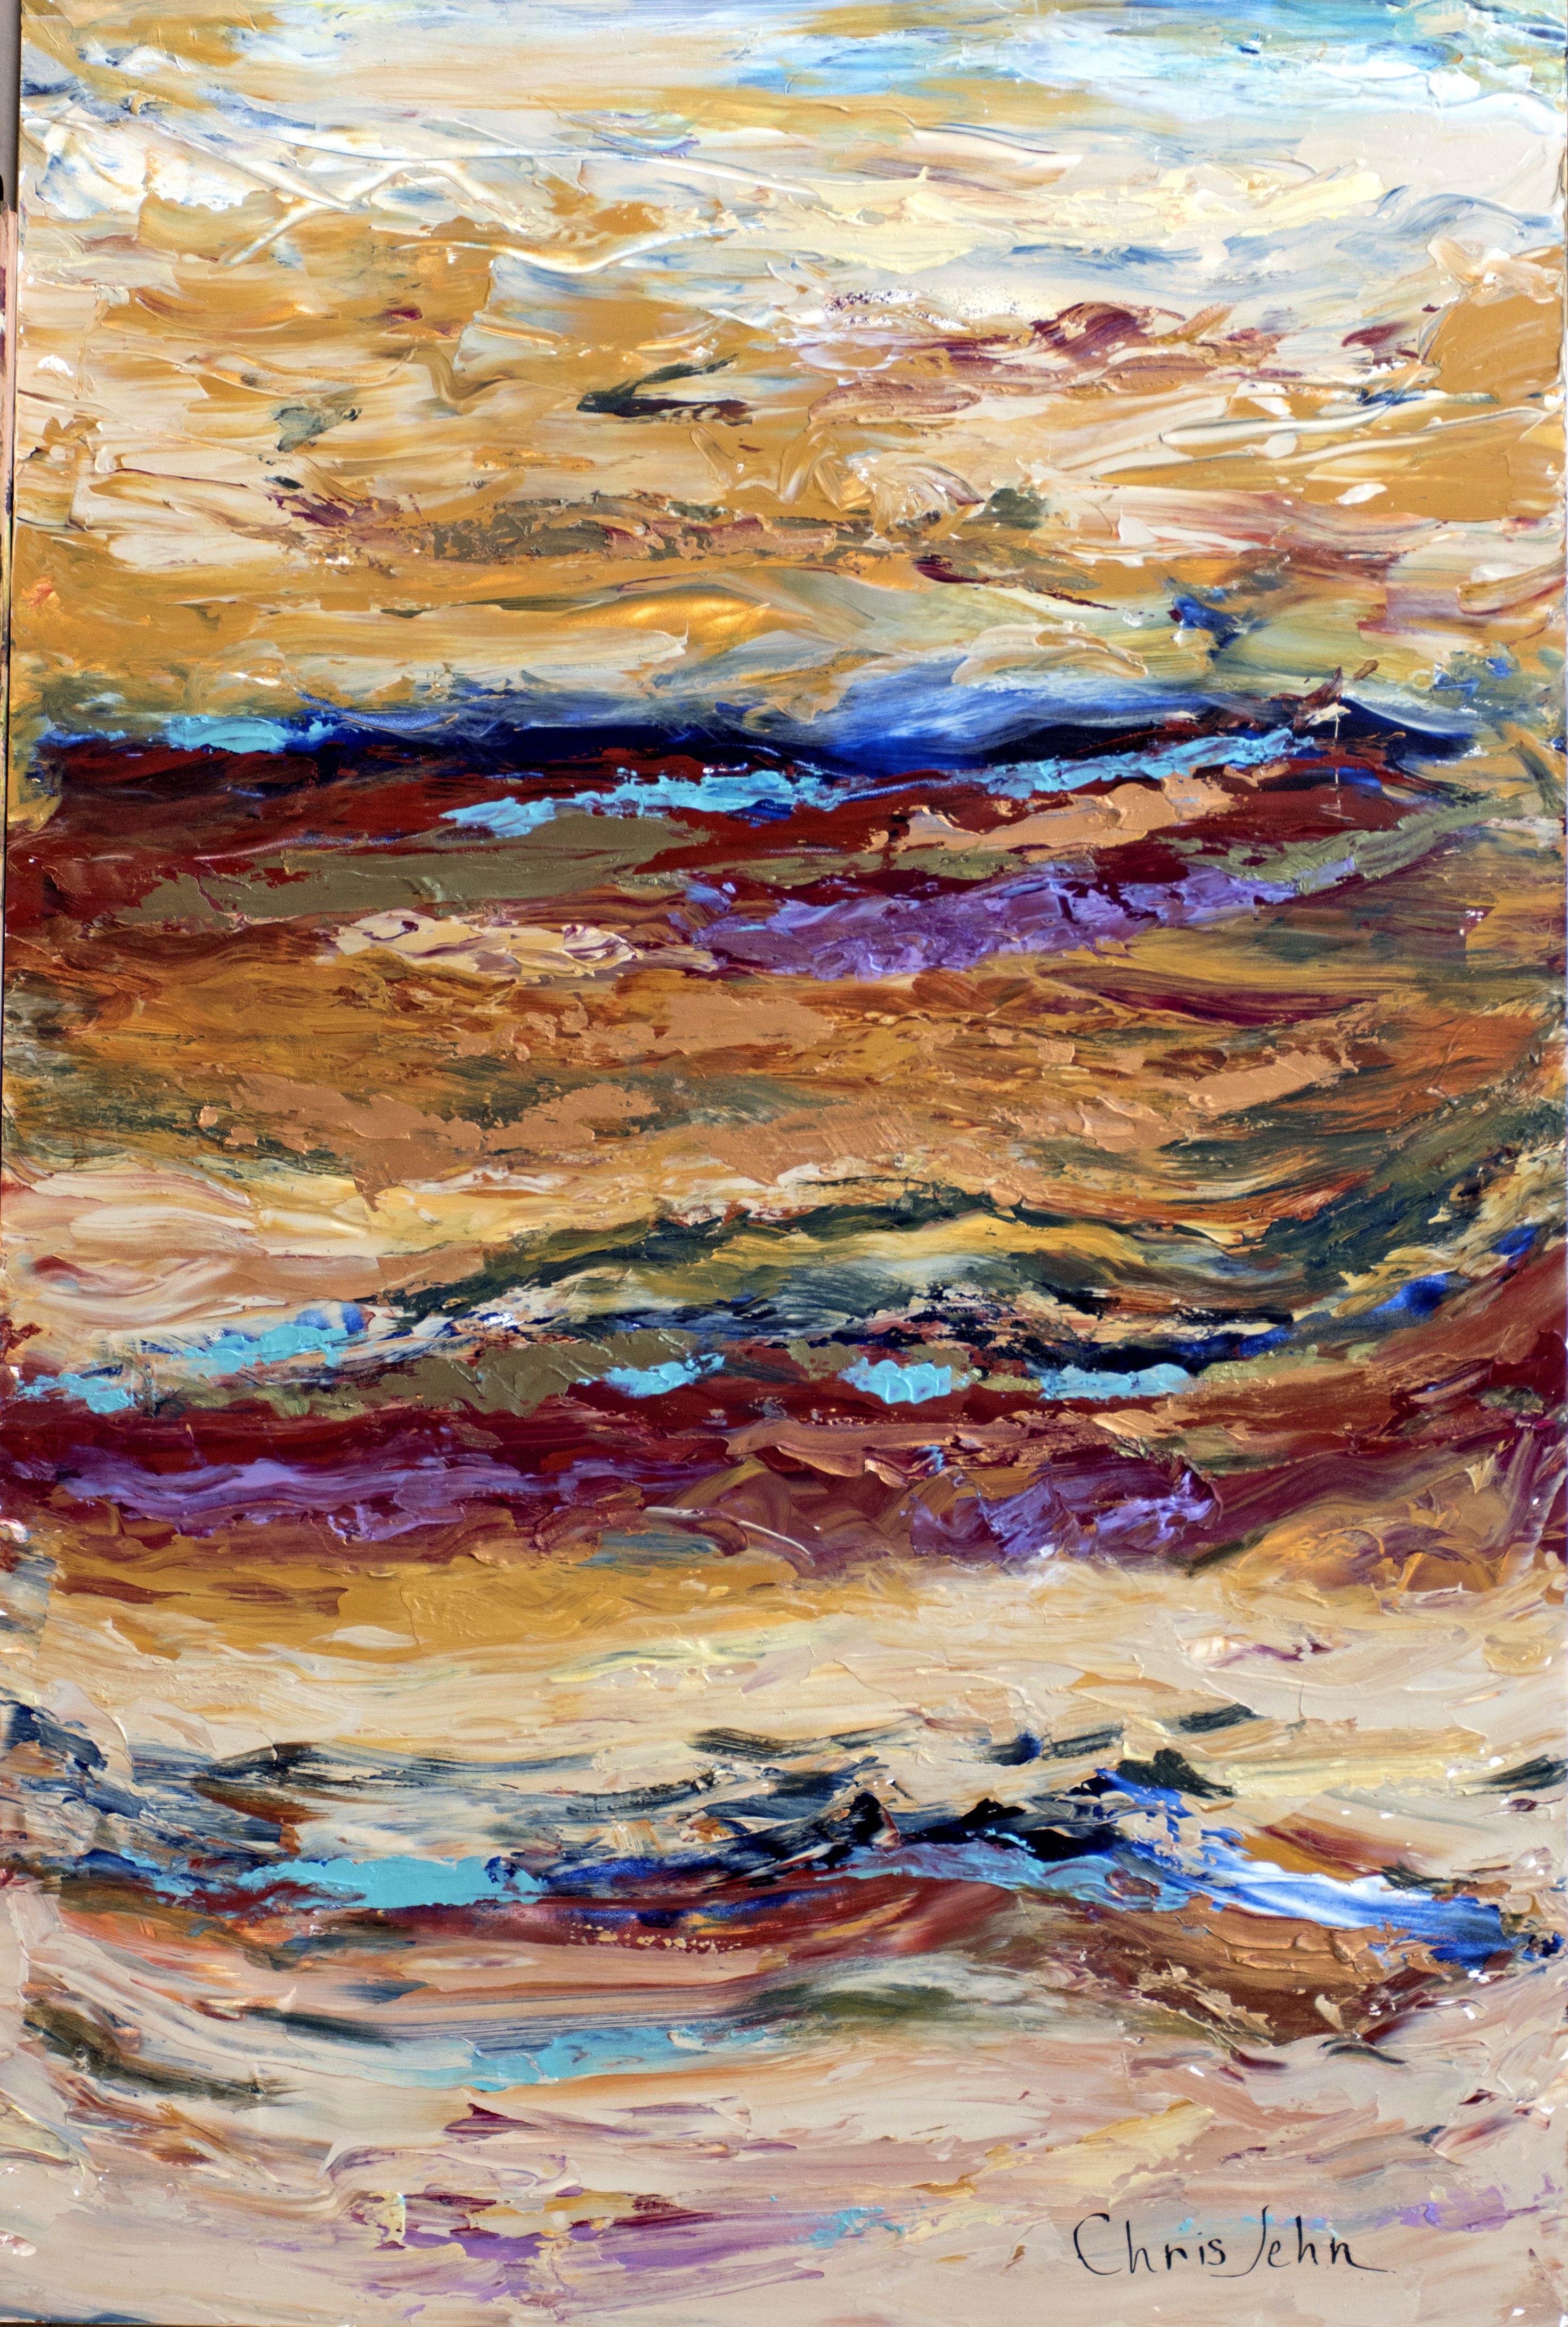 Chris Jehn; Colorful Sandstone, 2017, Original Painting Acrylic, 24 x 40 inches. Artwork description: 241 Inspiration for this piece was a piece of sandstone, the shapes were interesting.  From there I added complementary colors and texture.  Painted on an art panel wood board, 2sides.  Original work by Chris Jehn...